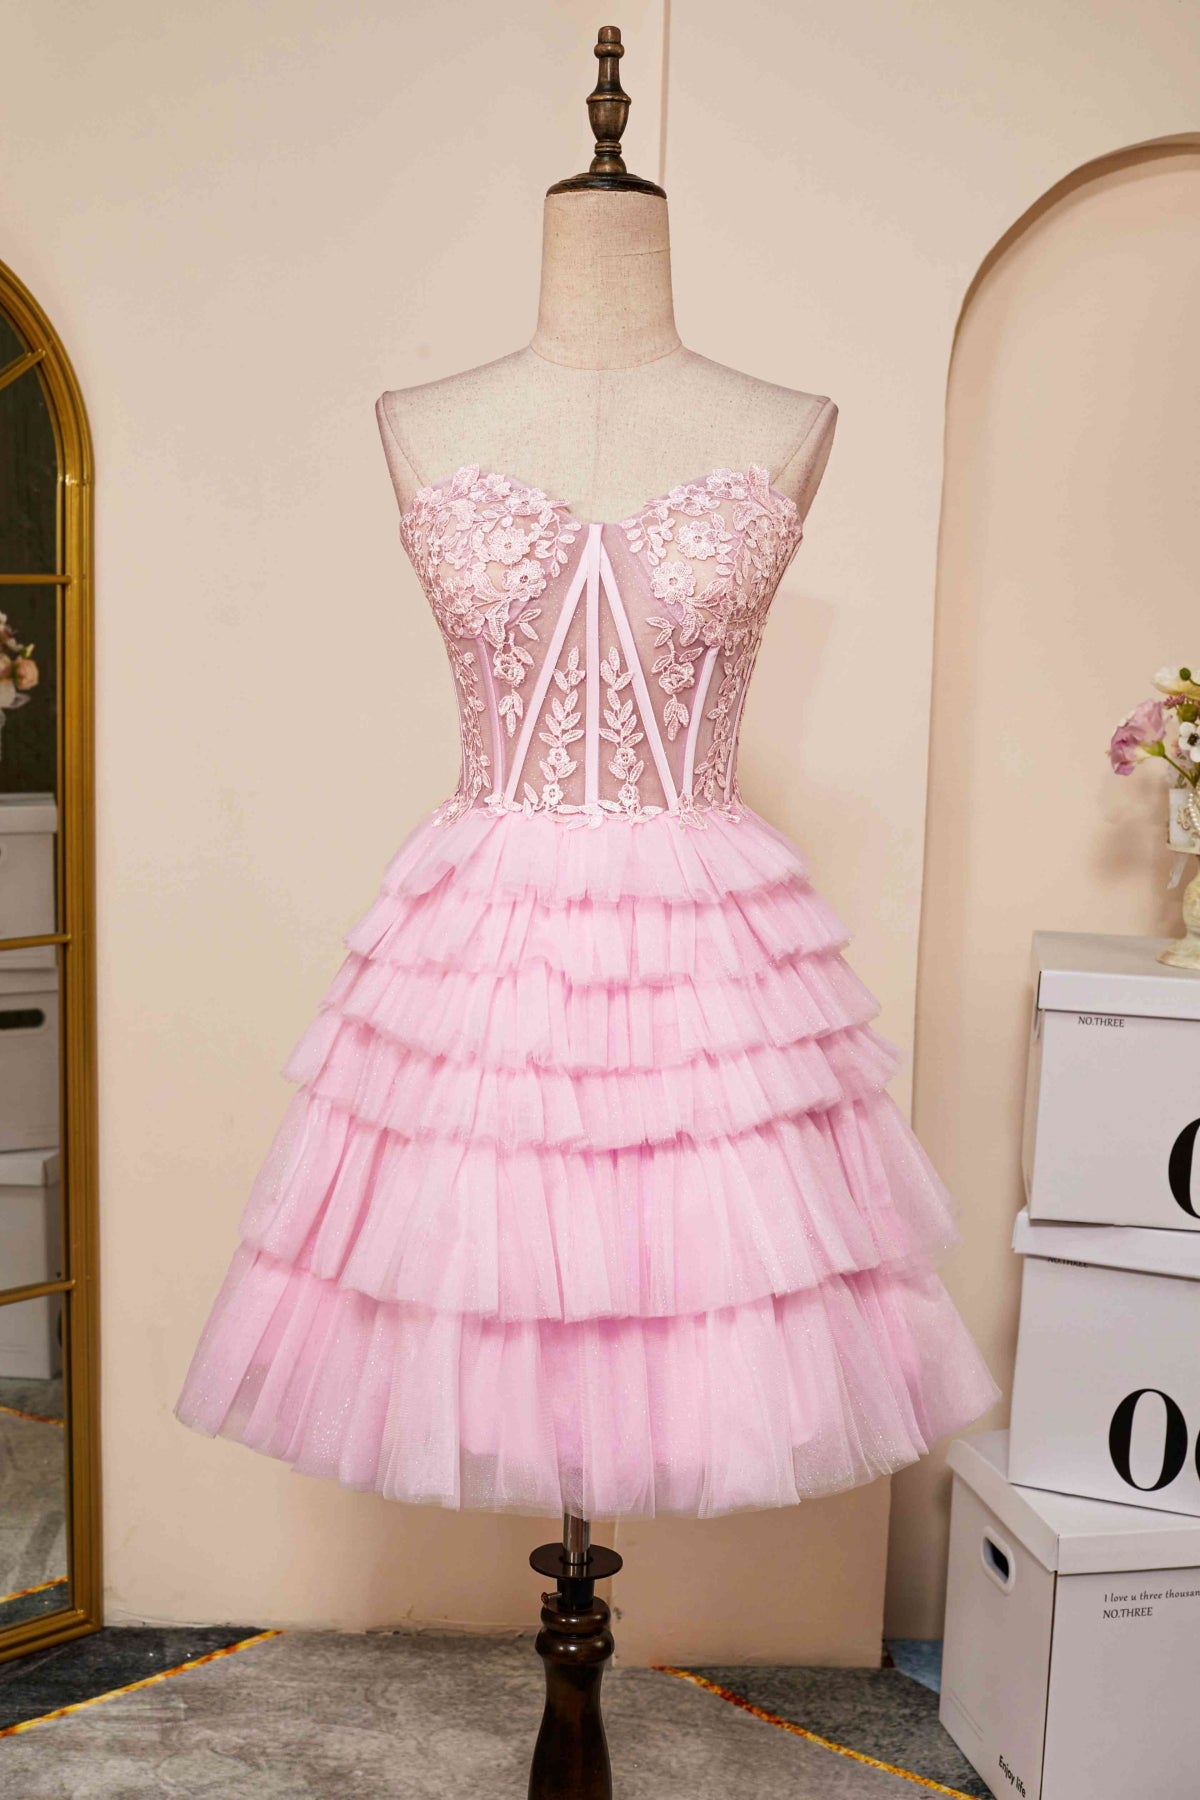 Pink Tulle Strapless Layered Lace Short Prom Dresses, Pink Lace Homecoming Dresses, Pink Formal Graduation Evening Dresses WT1291